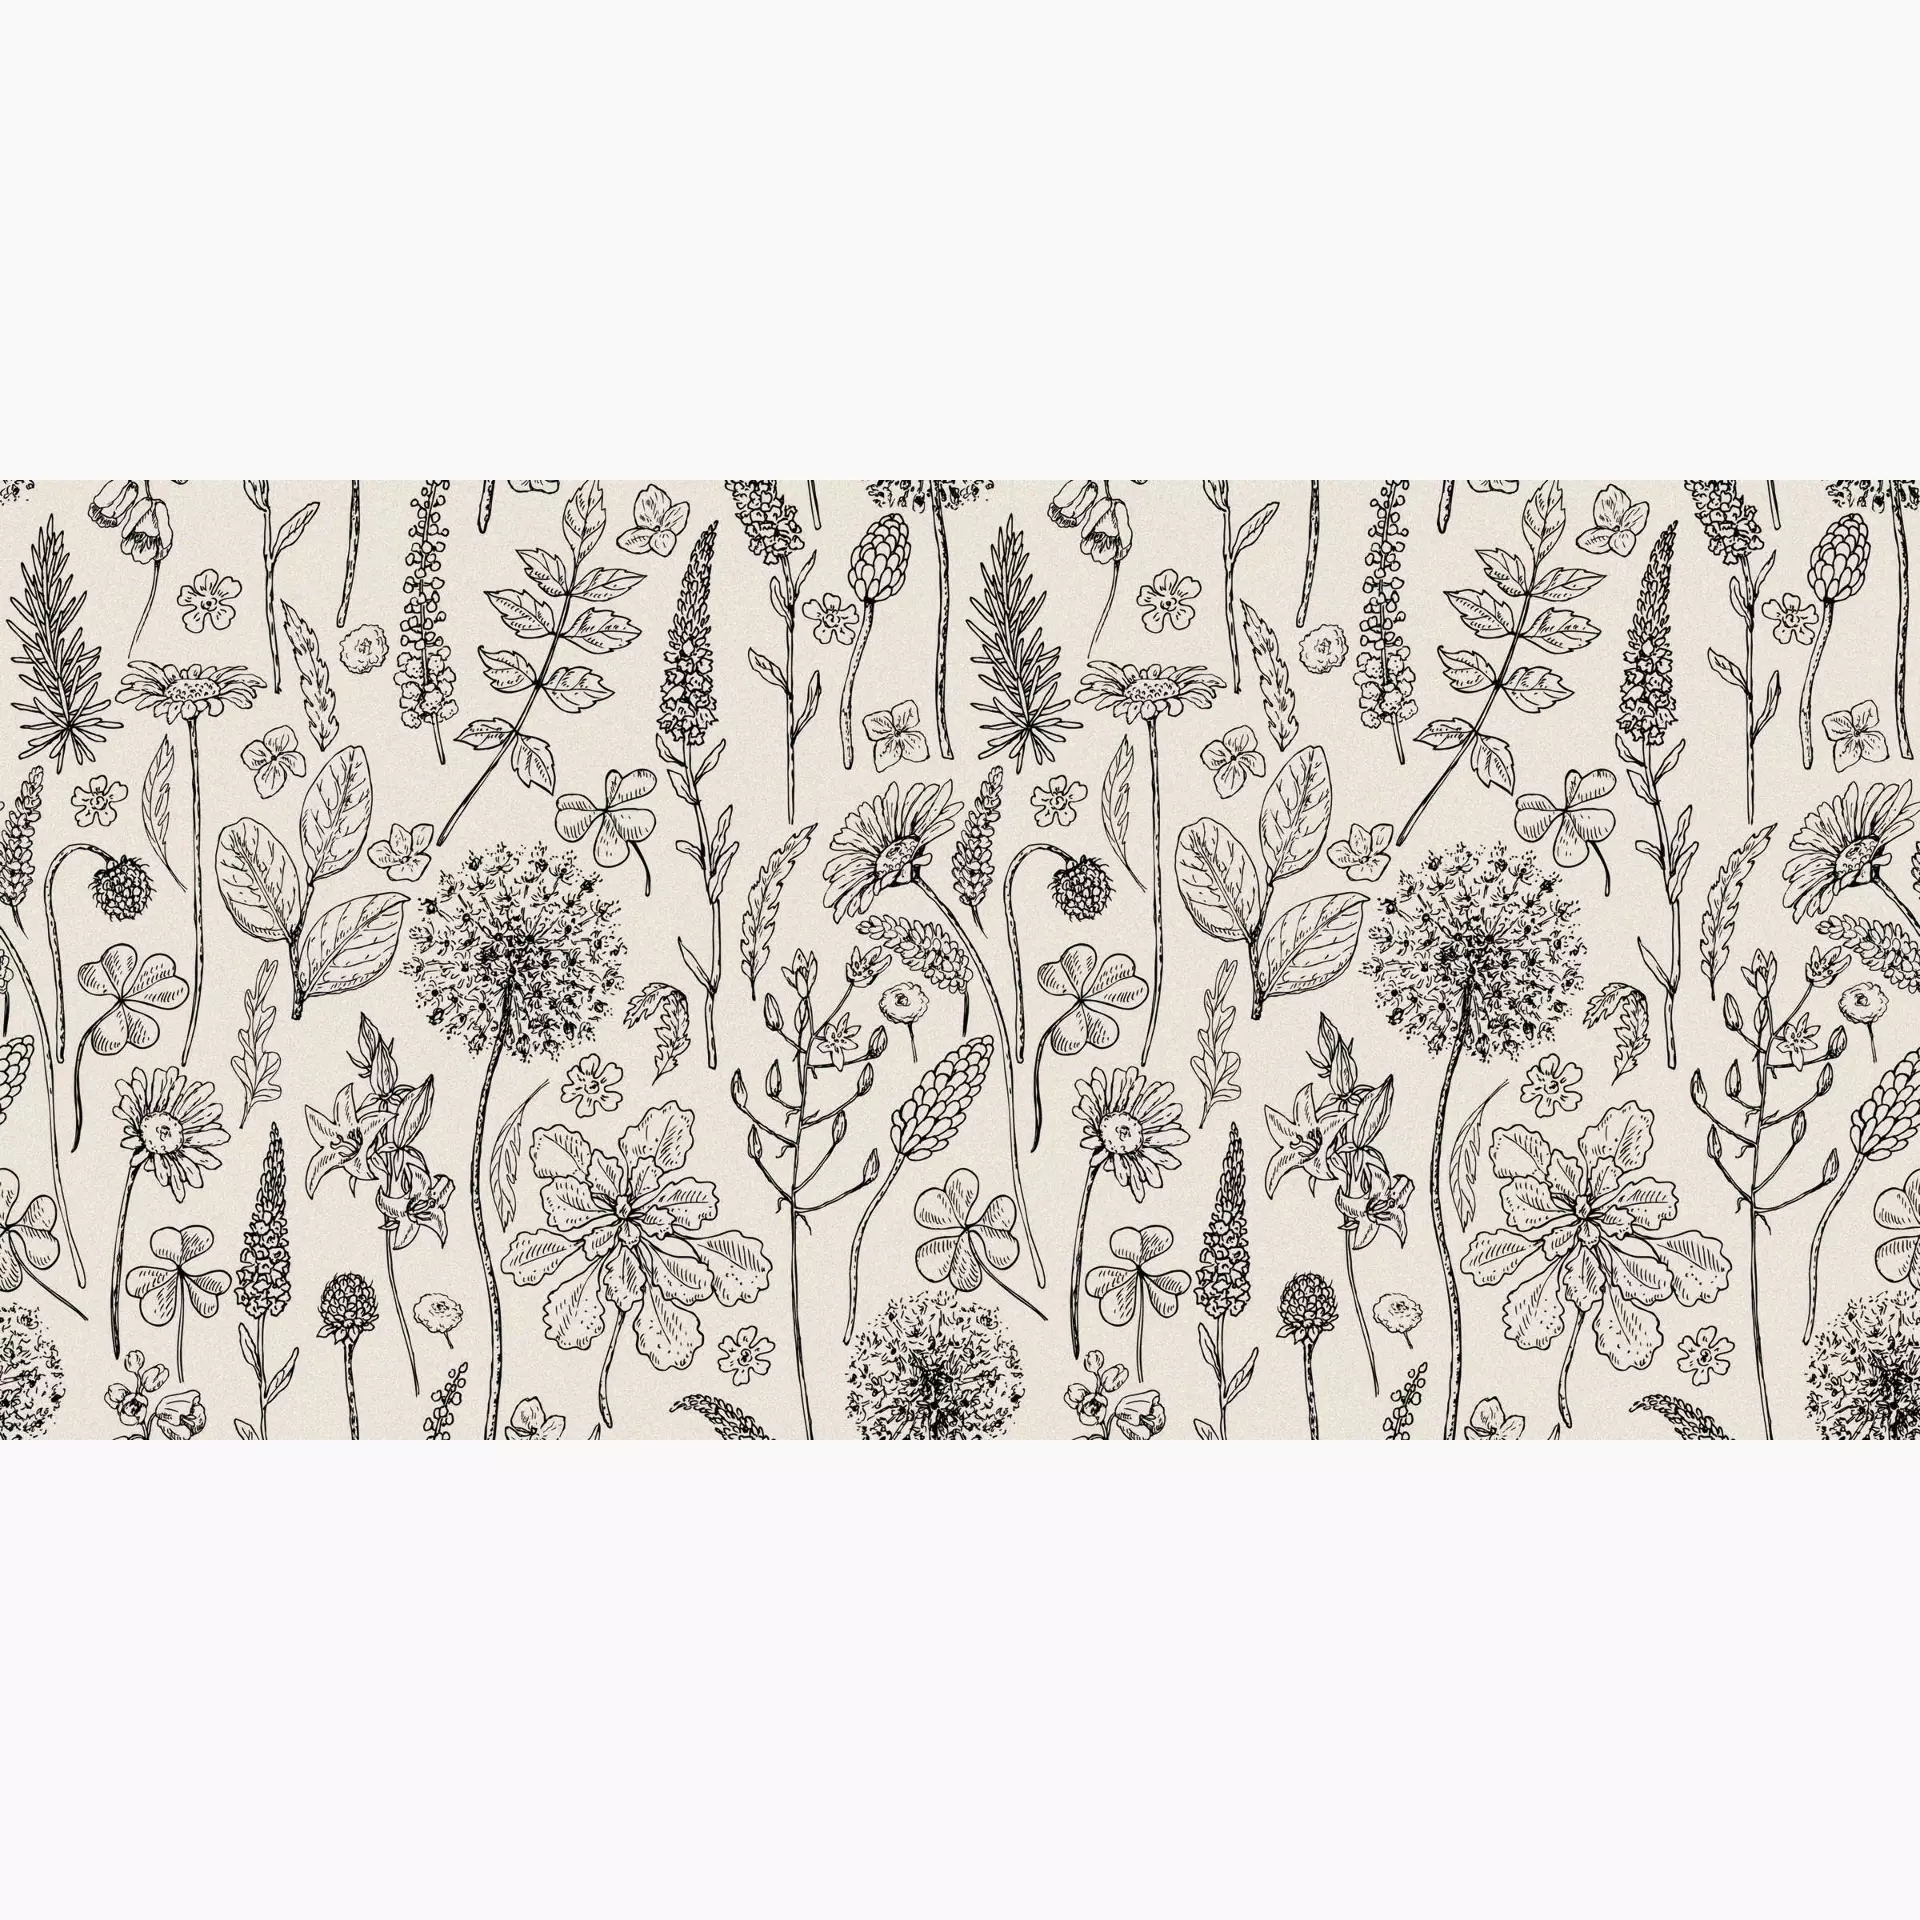 ABK Wide & Style Paint The Herbarium Digit + Decor PF60007629 60x120cm rectified 8,5mm